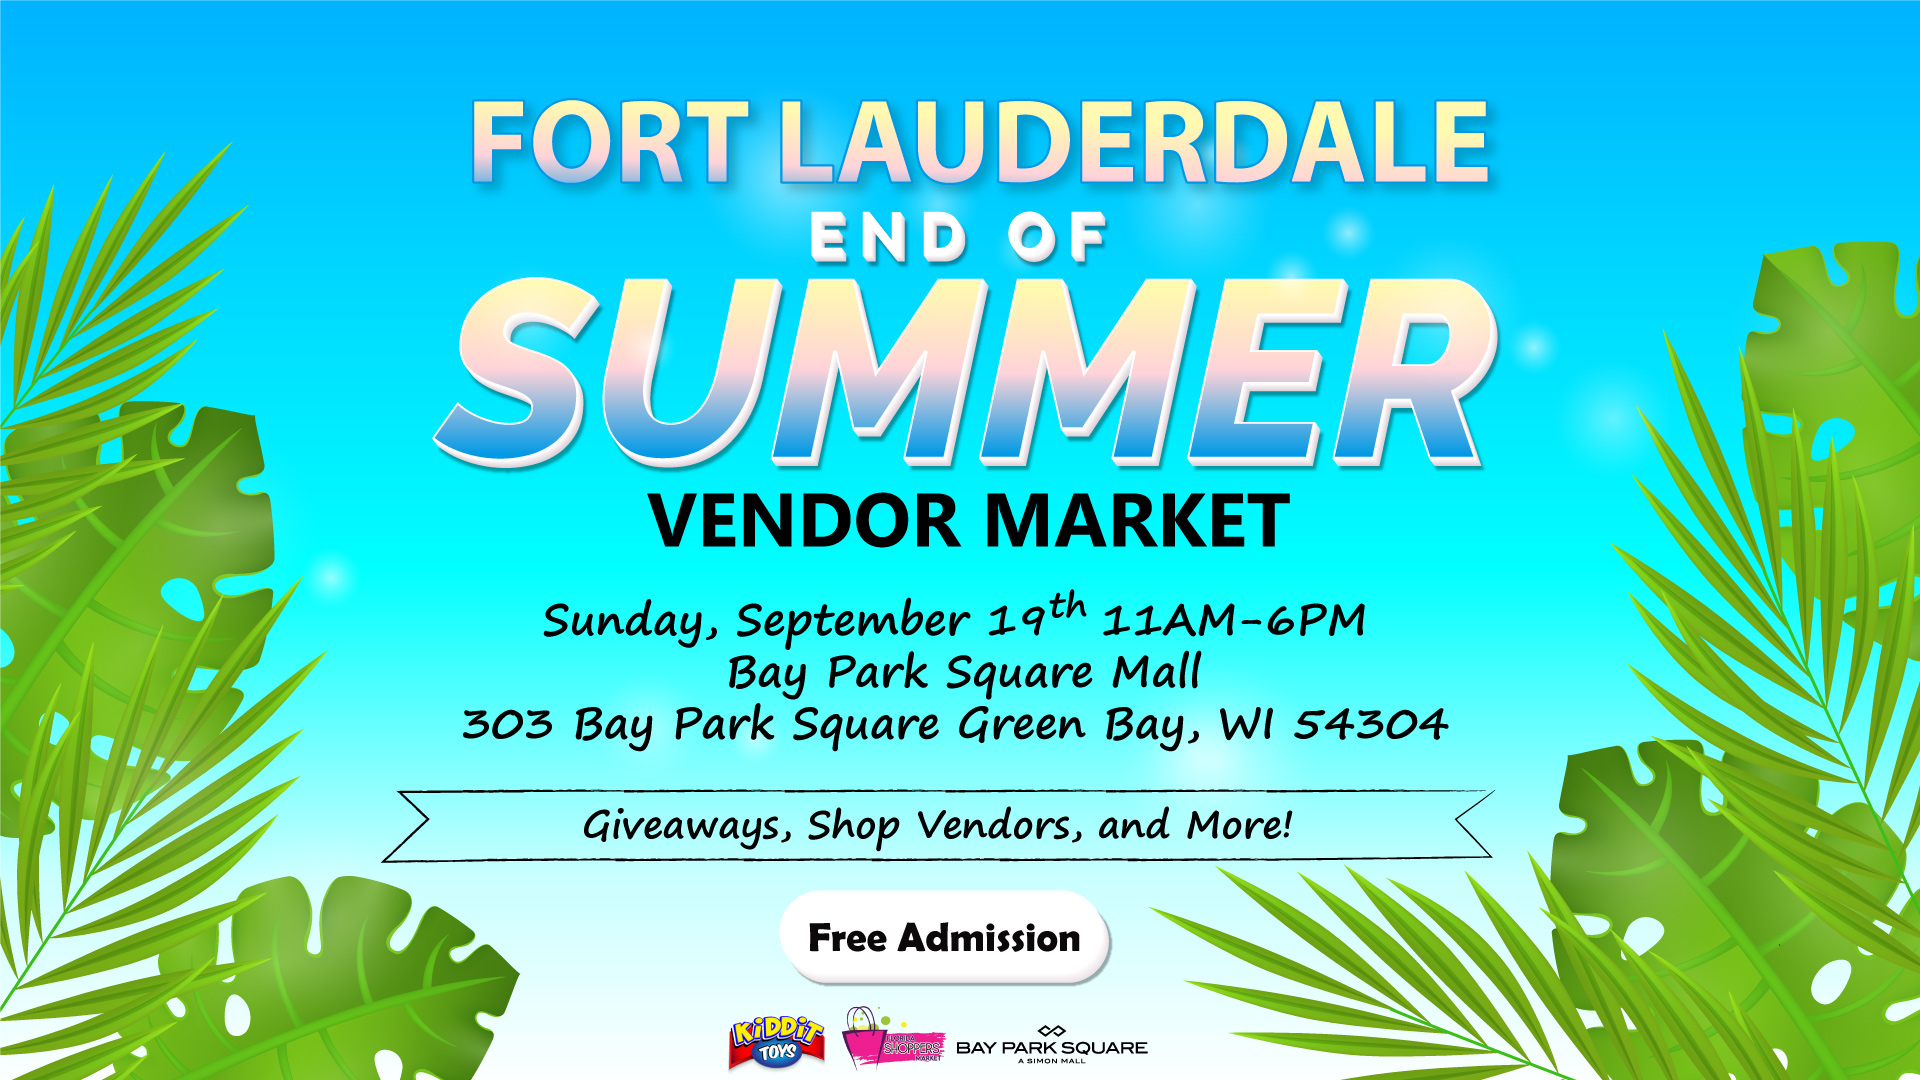 fort lauderdale single events